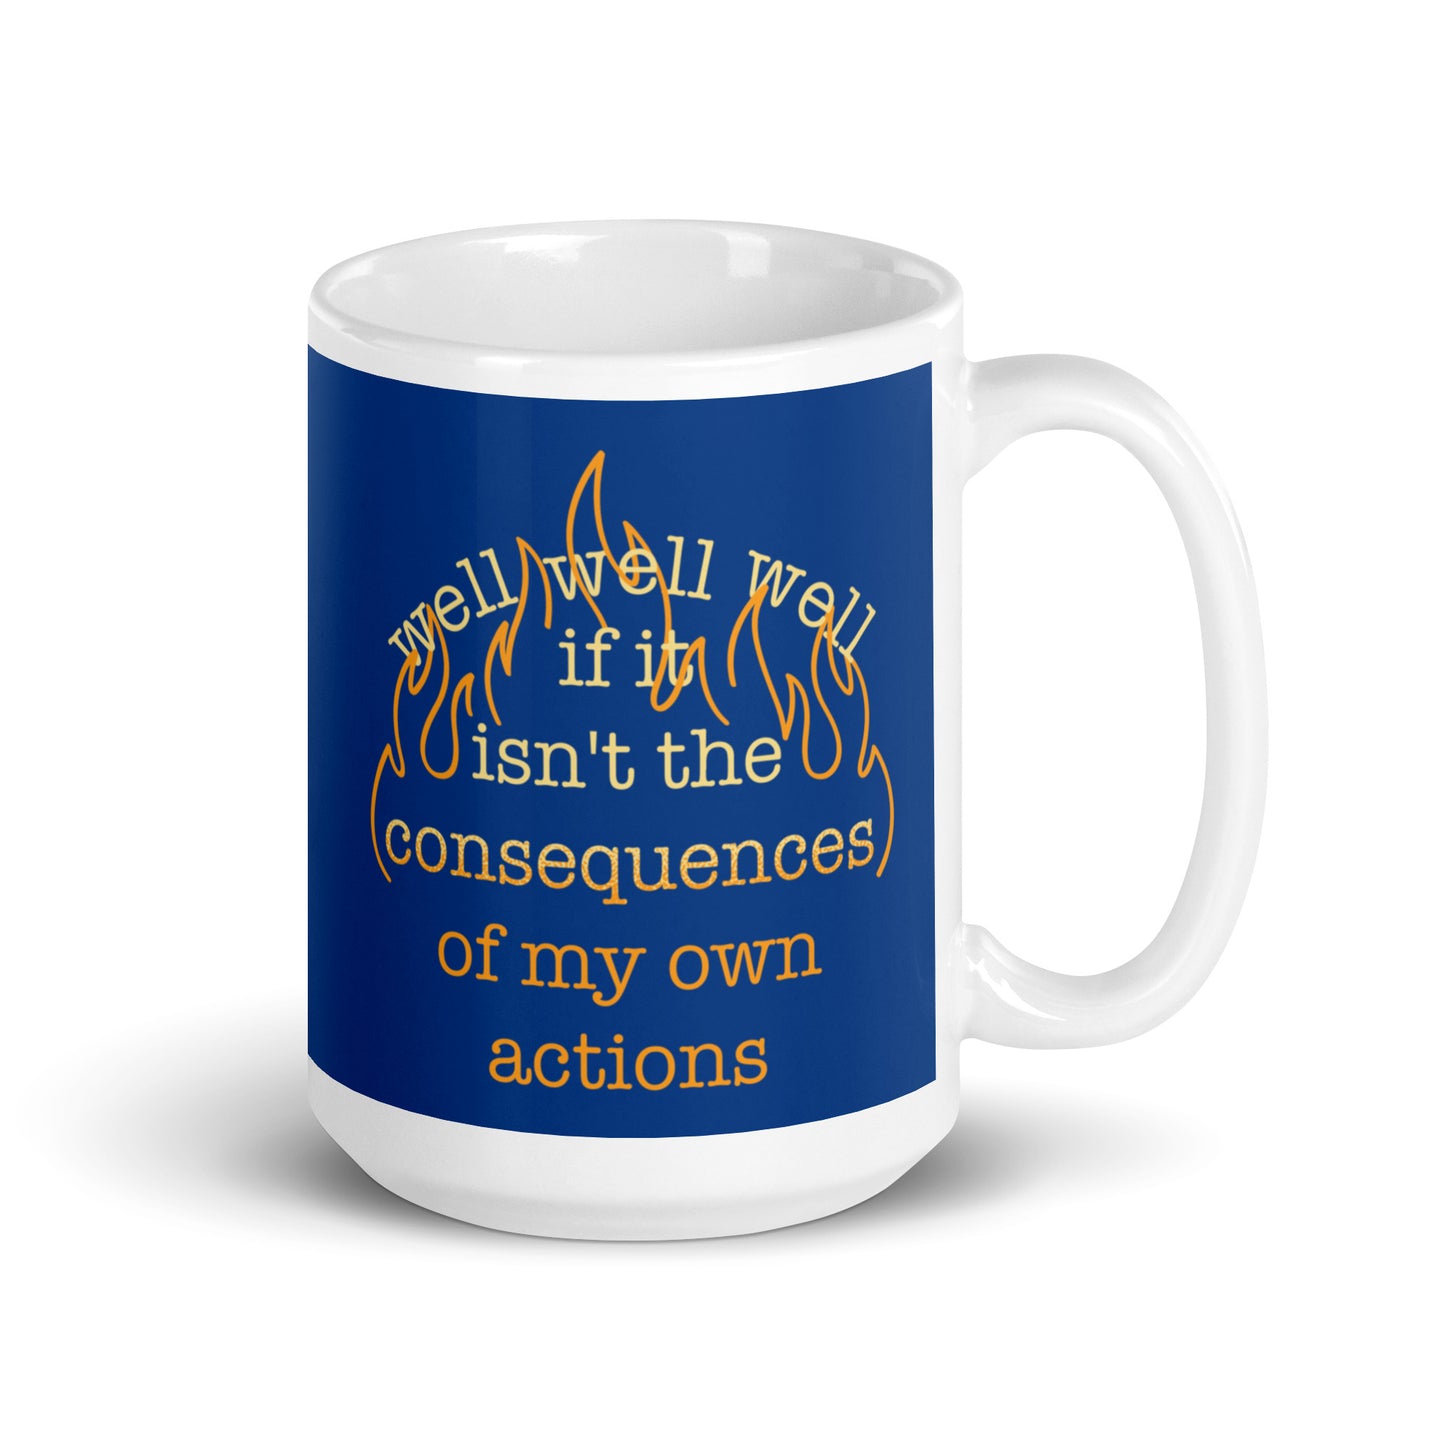 The Consequences Of My Own Actions Mug